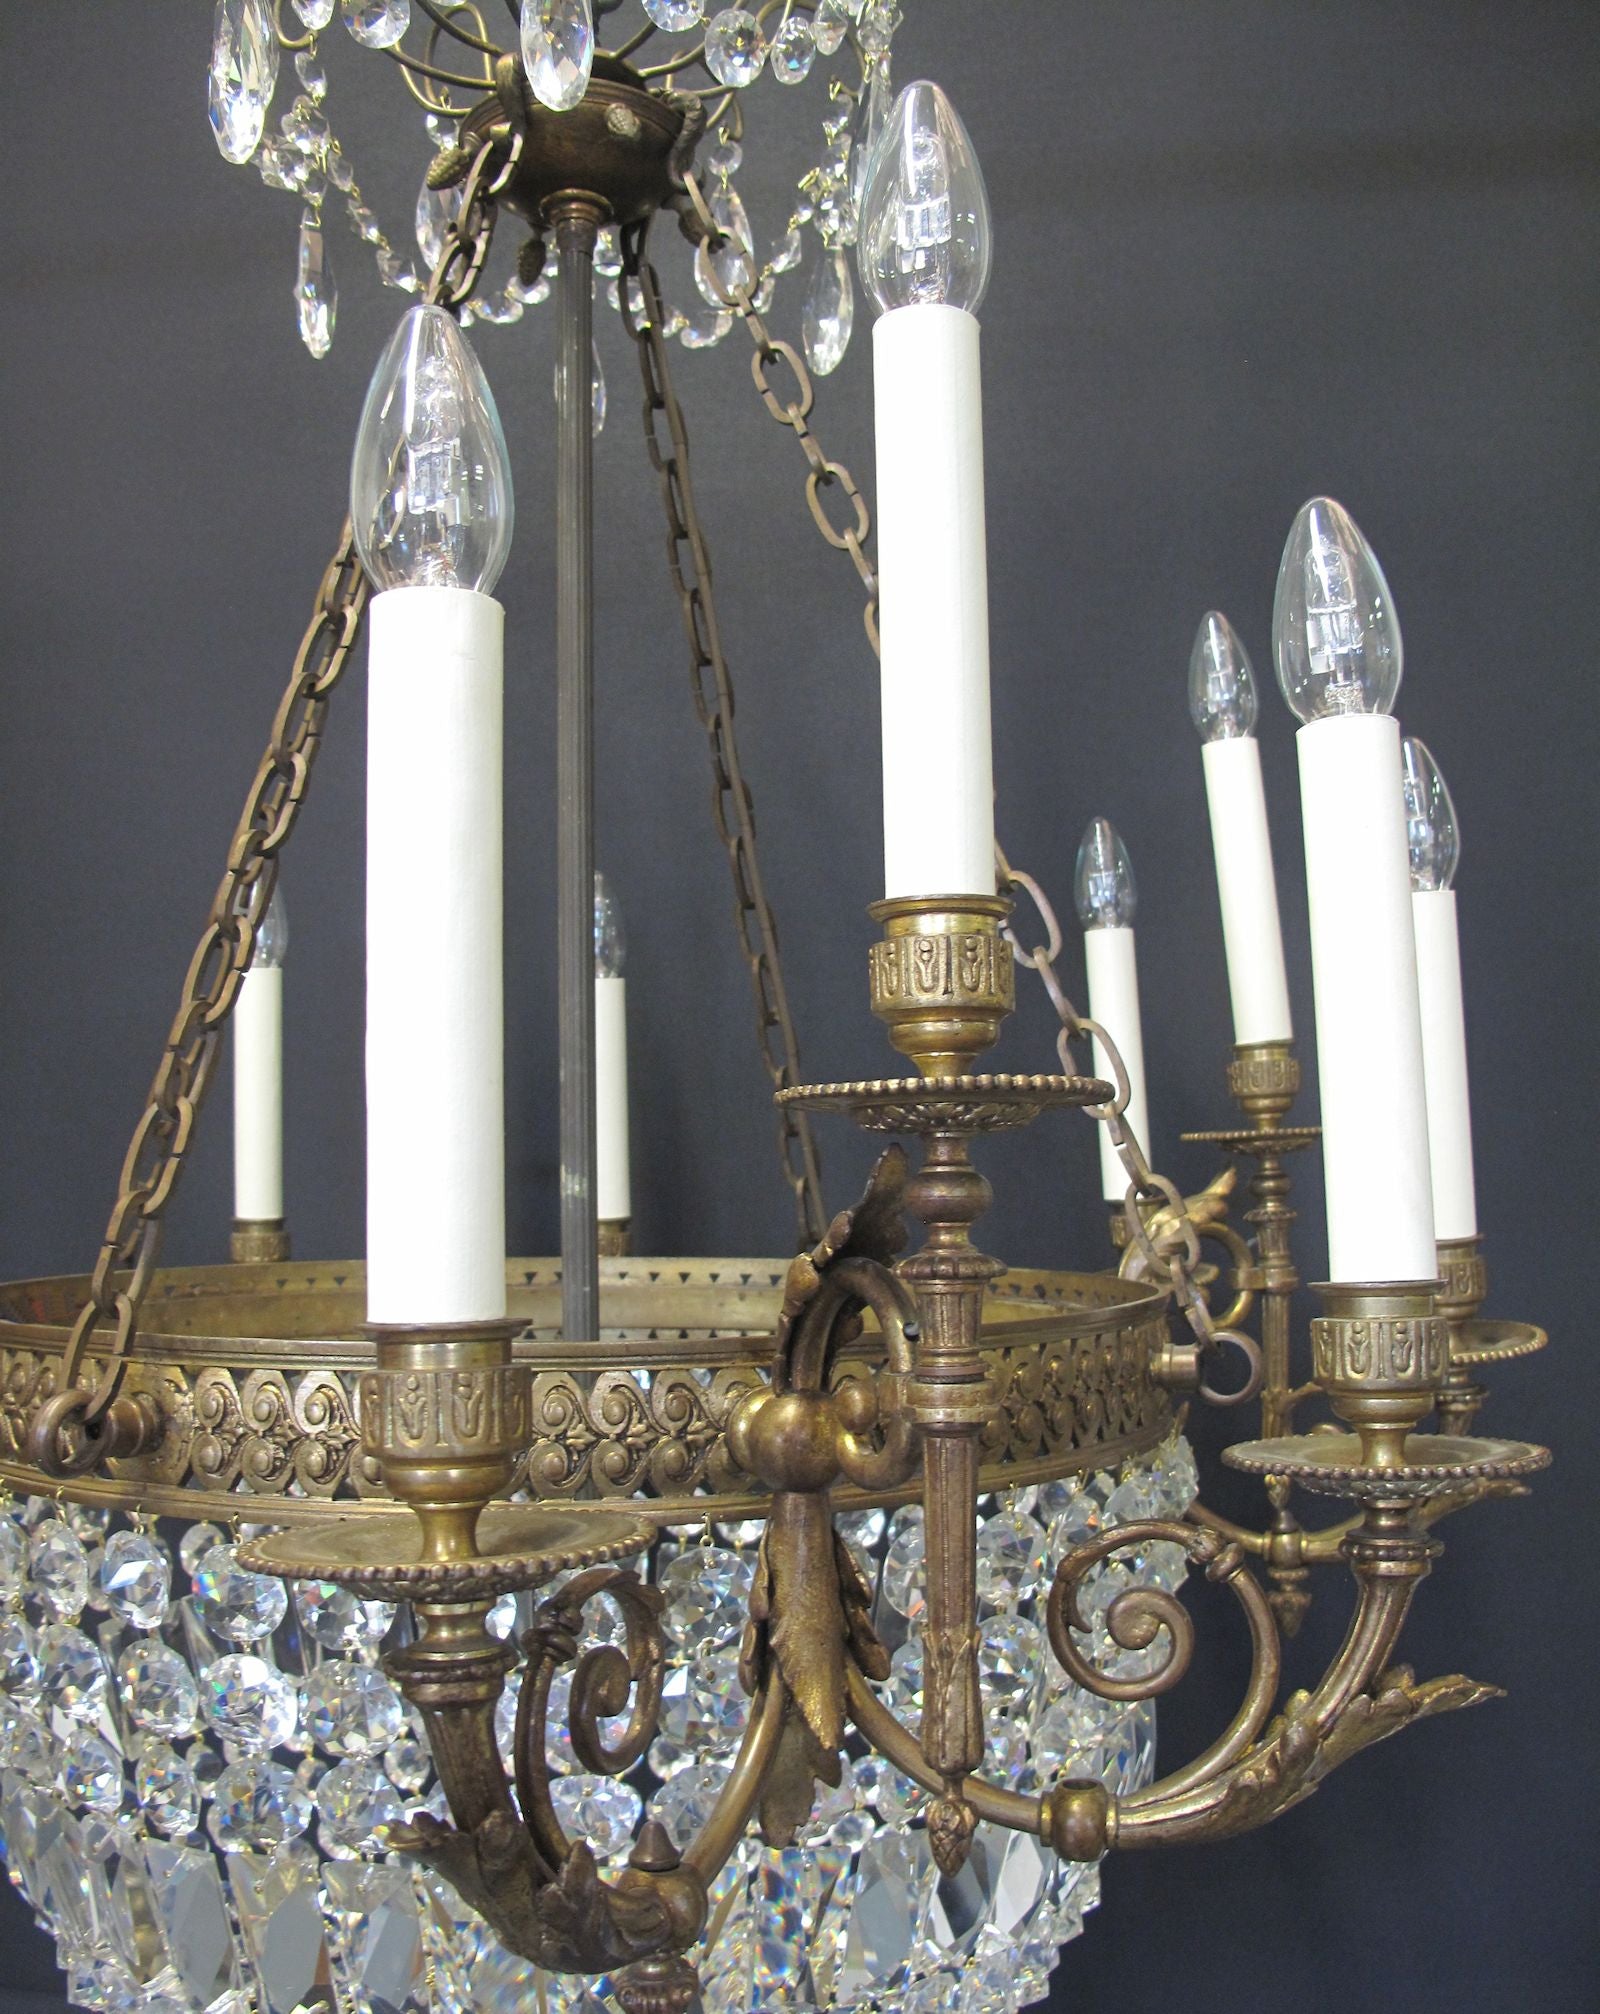 12 light ormolu and glass chandelier, side on view